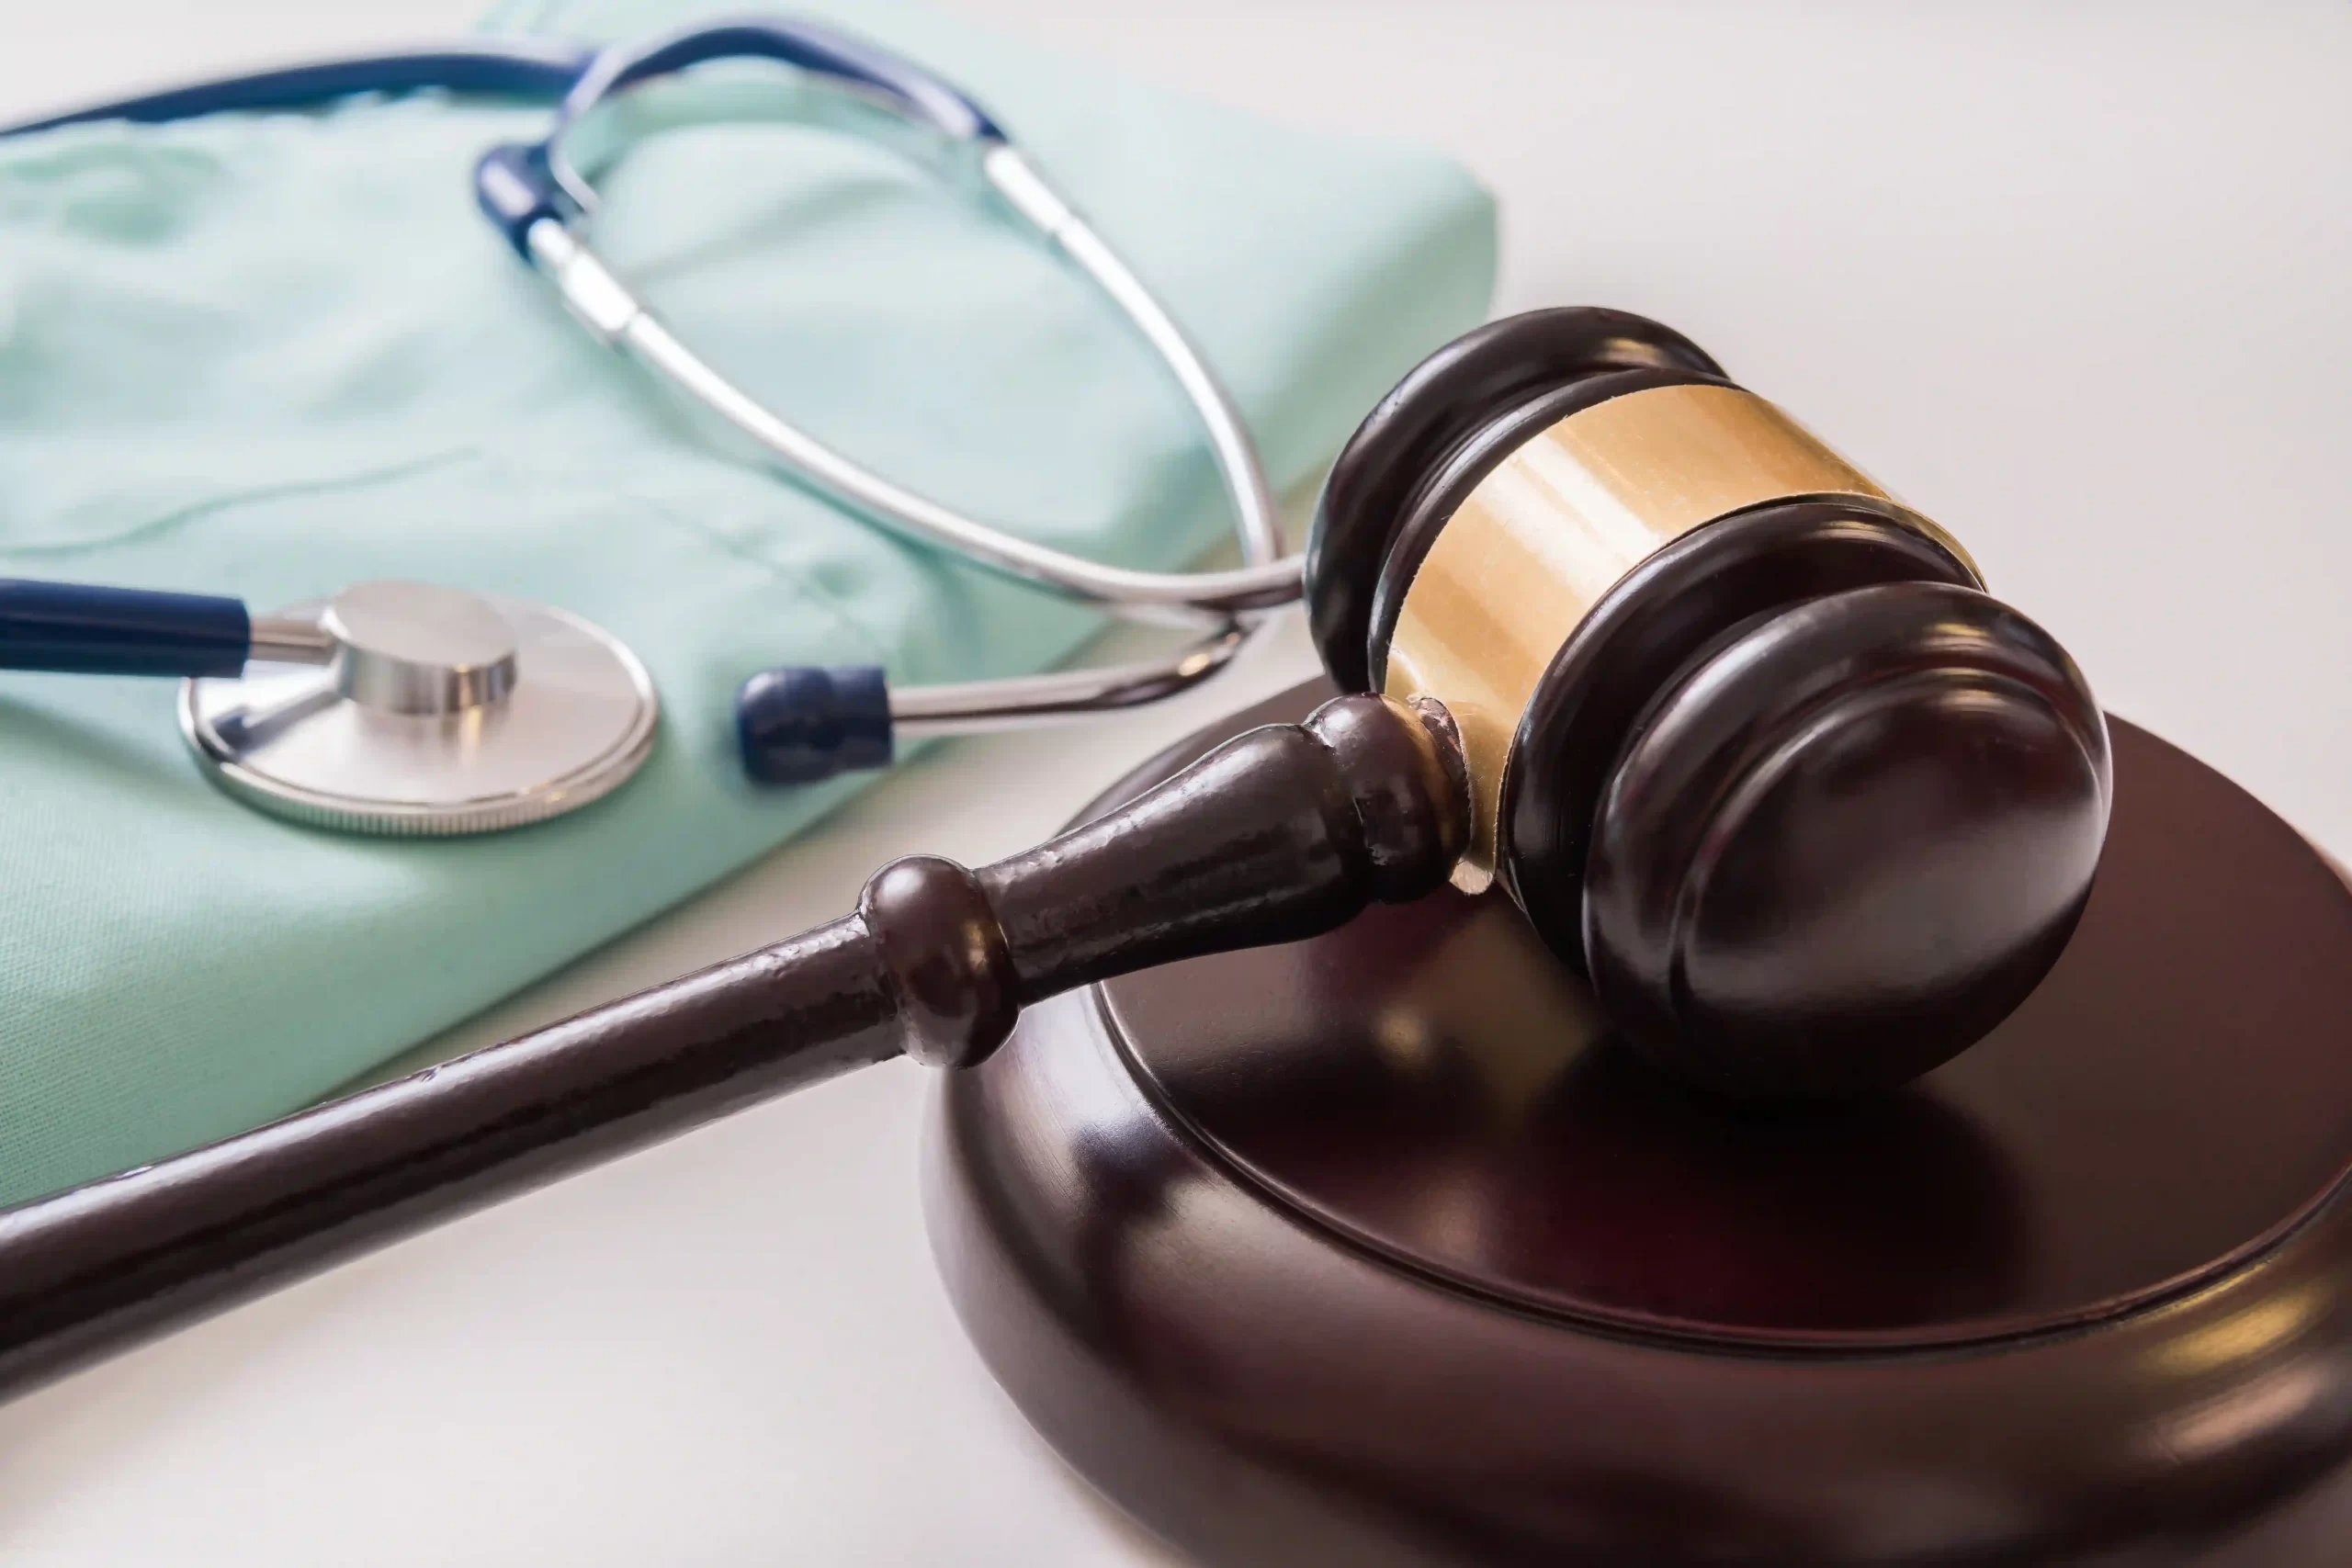 Seek Compensation For Medical Negligence In NSW. From Emotional Distress To Financial Impact, Know Your Rights Under The Civil Liability Act.